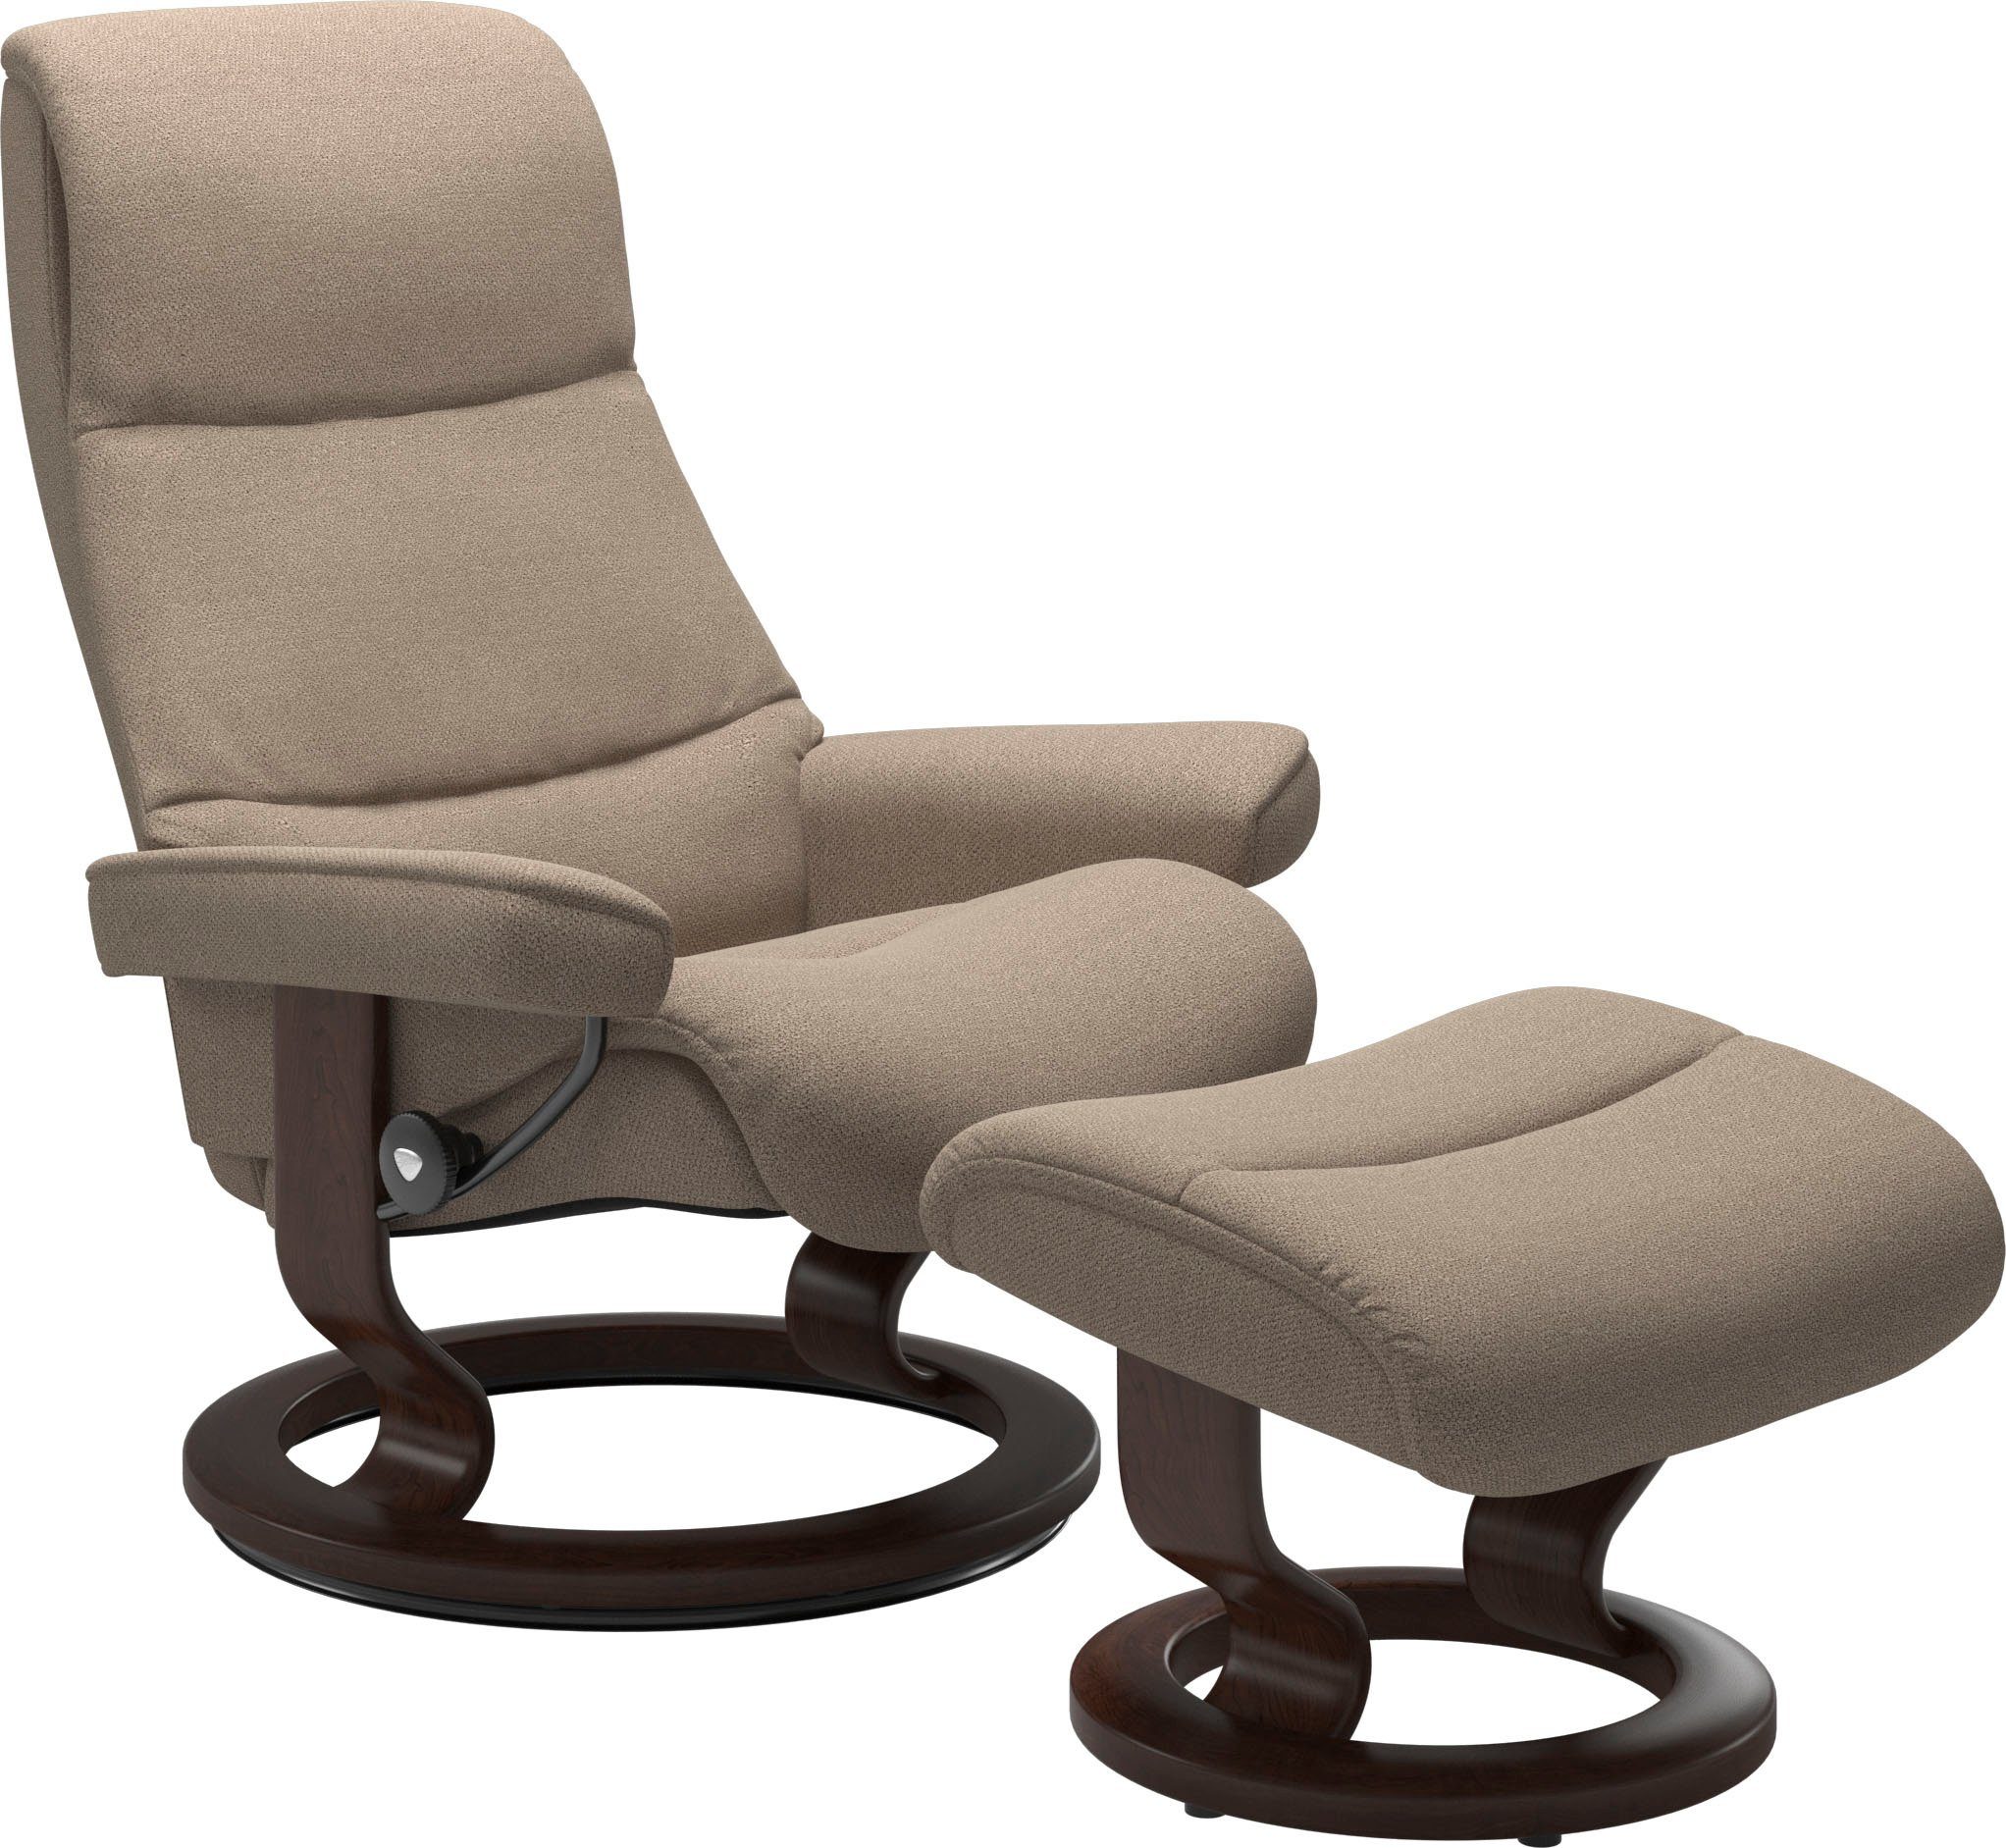 Stressless® Relaxsessel View, mit Classic Base, Größe S,Gestell Braun | Funktionssessel